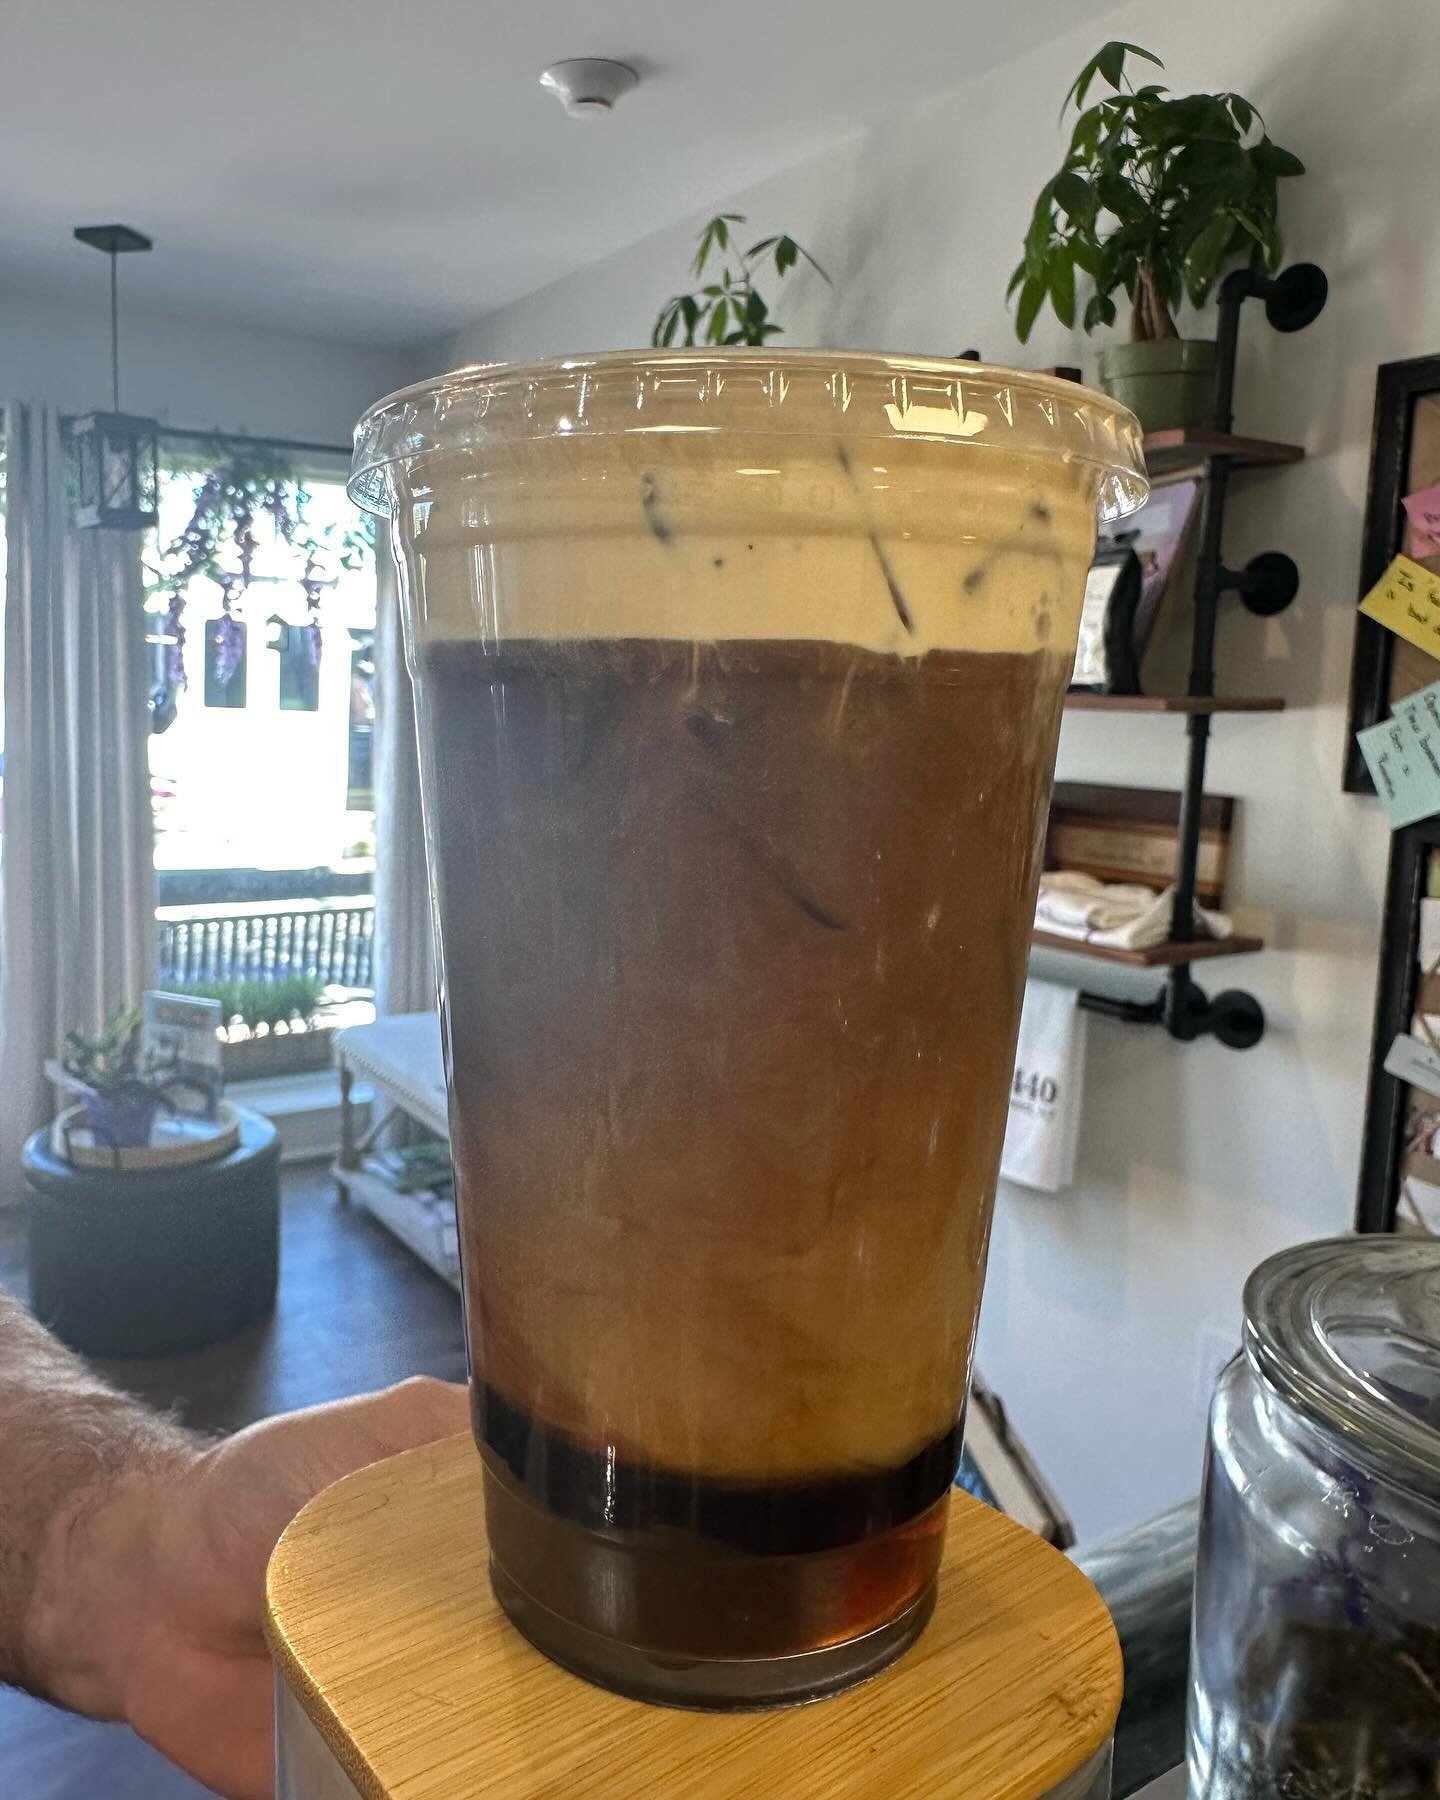 Vanilla iced cold brew with  salted caramel cold foam (YES DAIRY FREE 😃)
Thanks @woodard_creative_carvings for keeping our creative juices flowing !!! 

#glutenfree #dairyfree #ourpequannock #smallbatchbaking 
#togetherwearelimitless #bakedfresh
#om